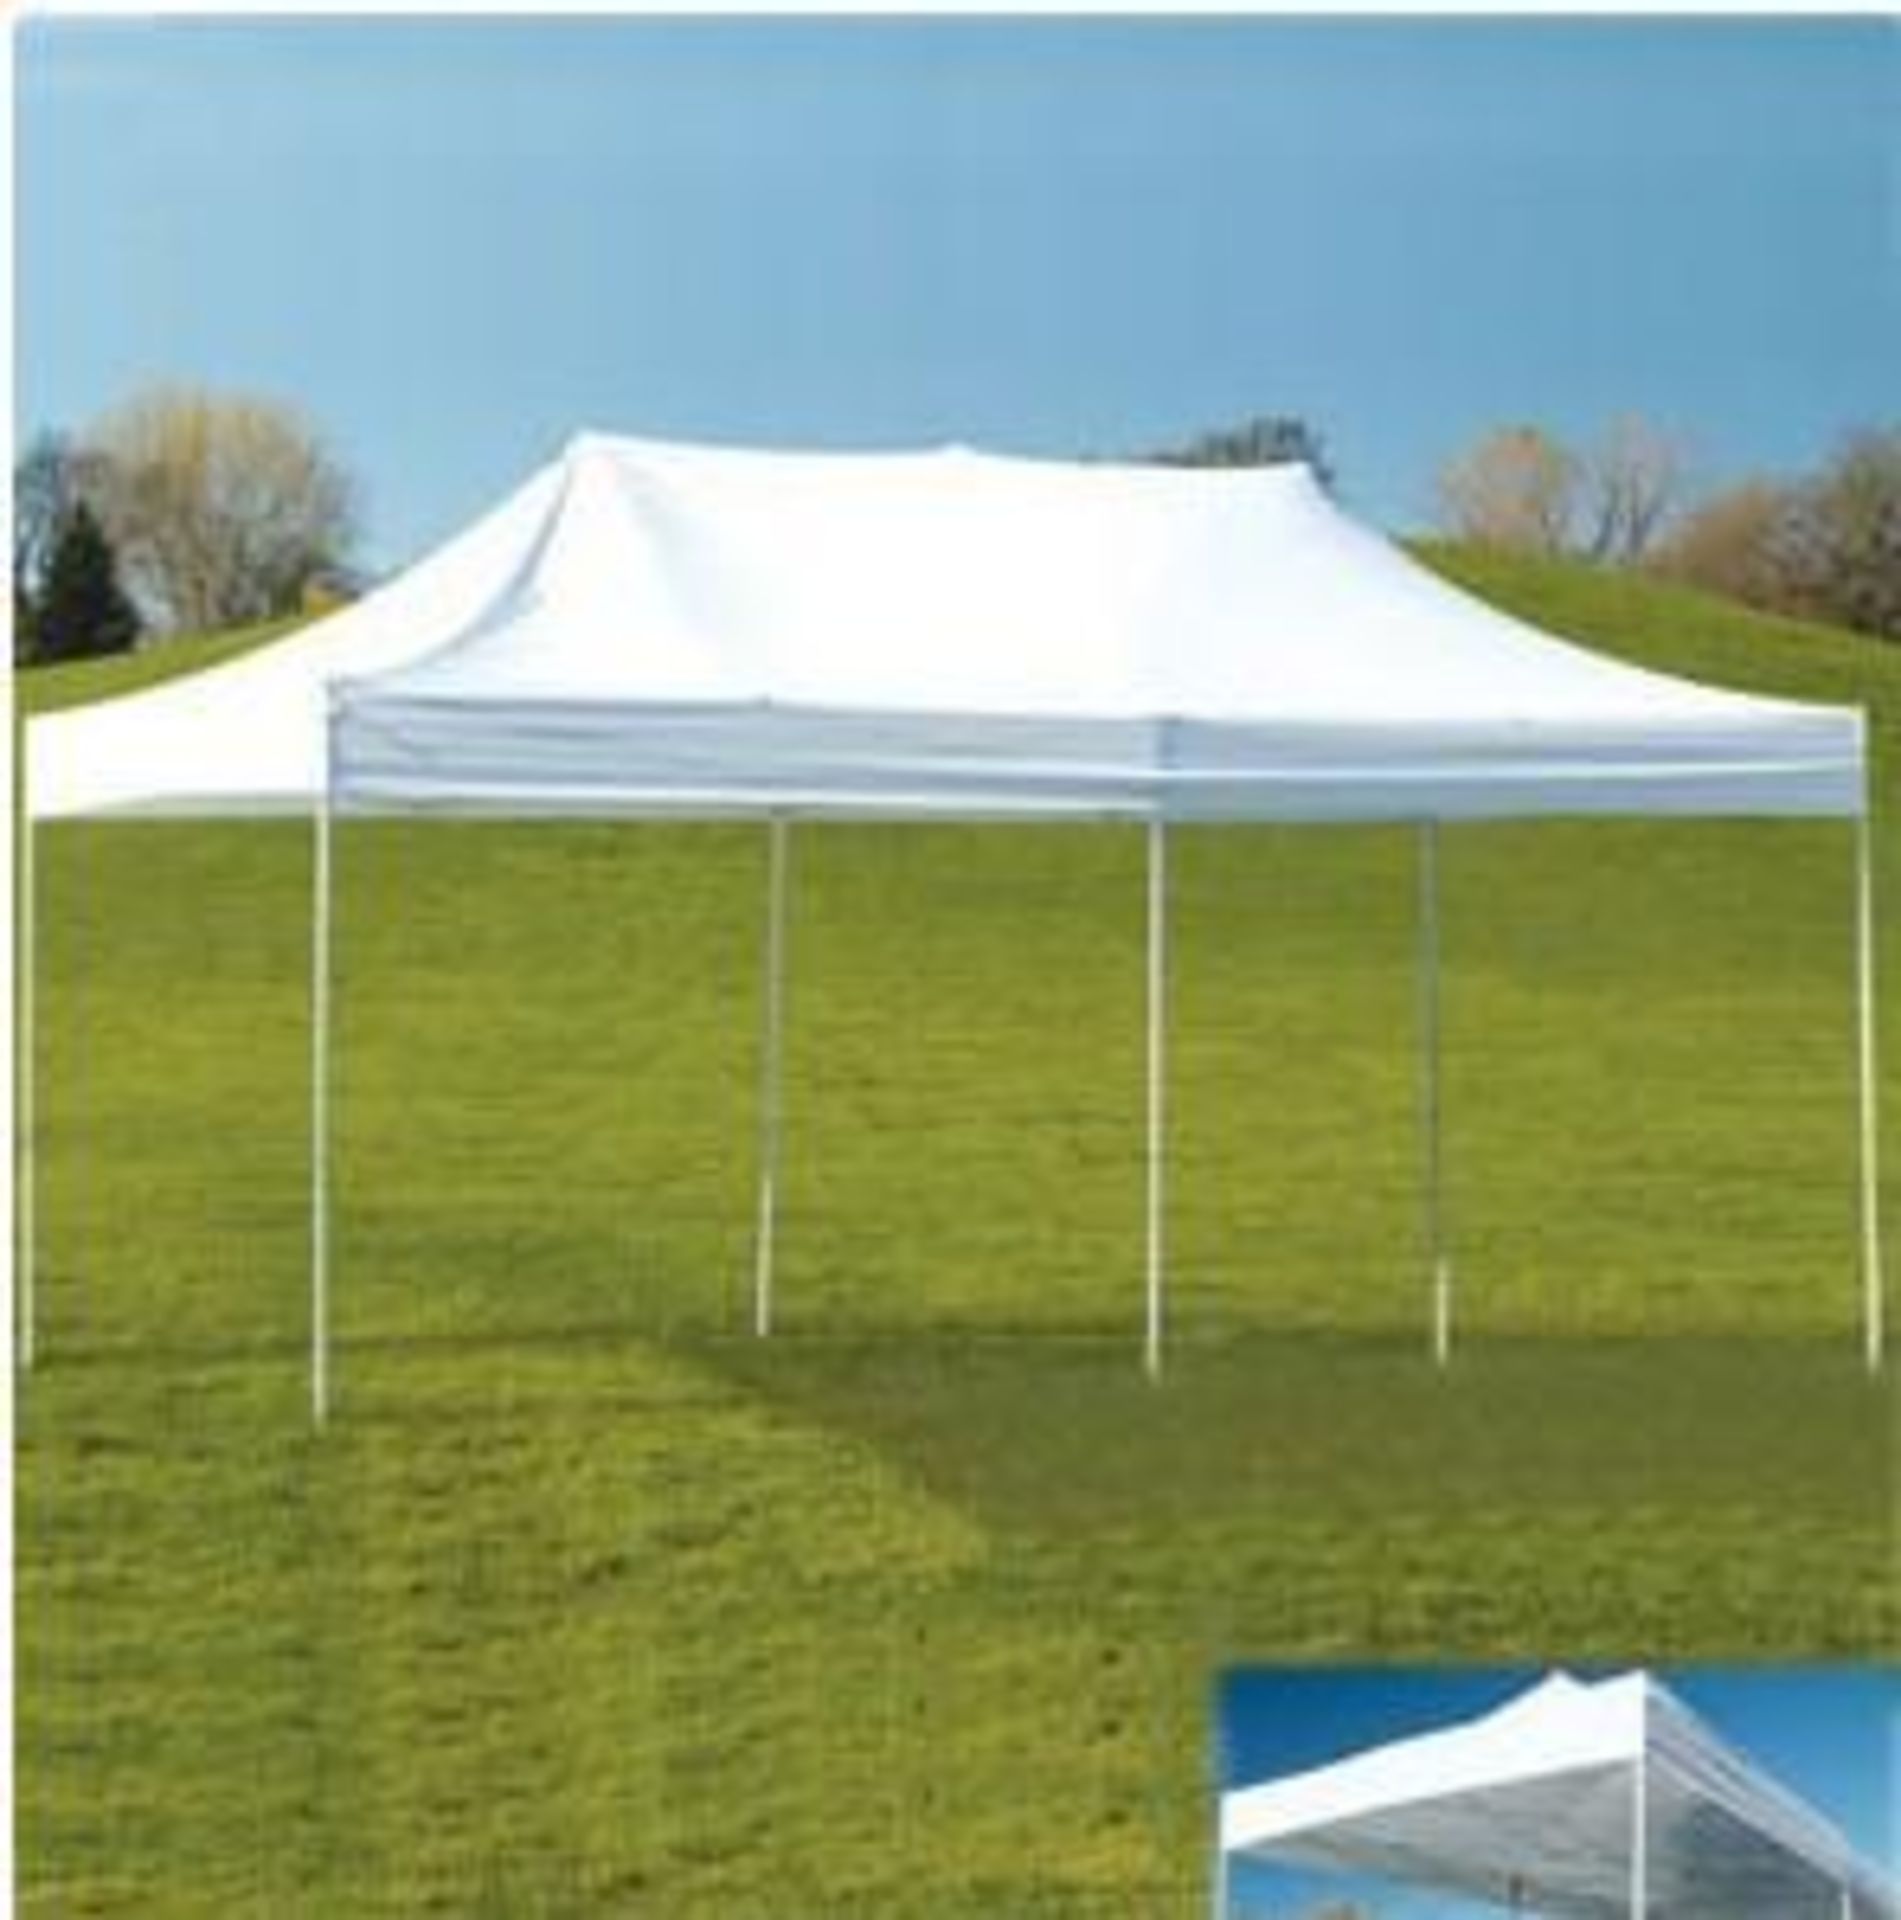 10' x 20' EZ Up Customer Install White Canopy (Image For Reference Only, Actual Item May Look